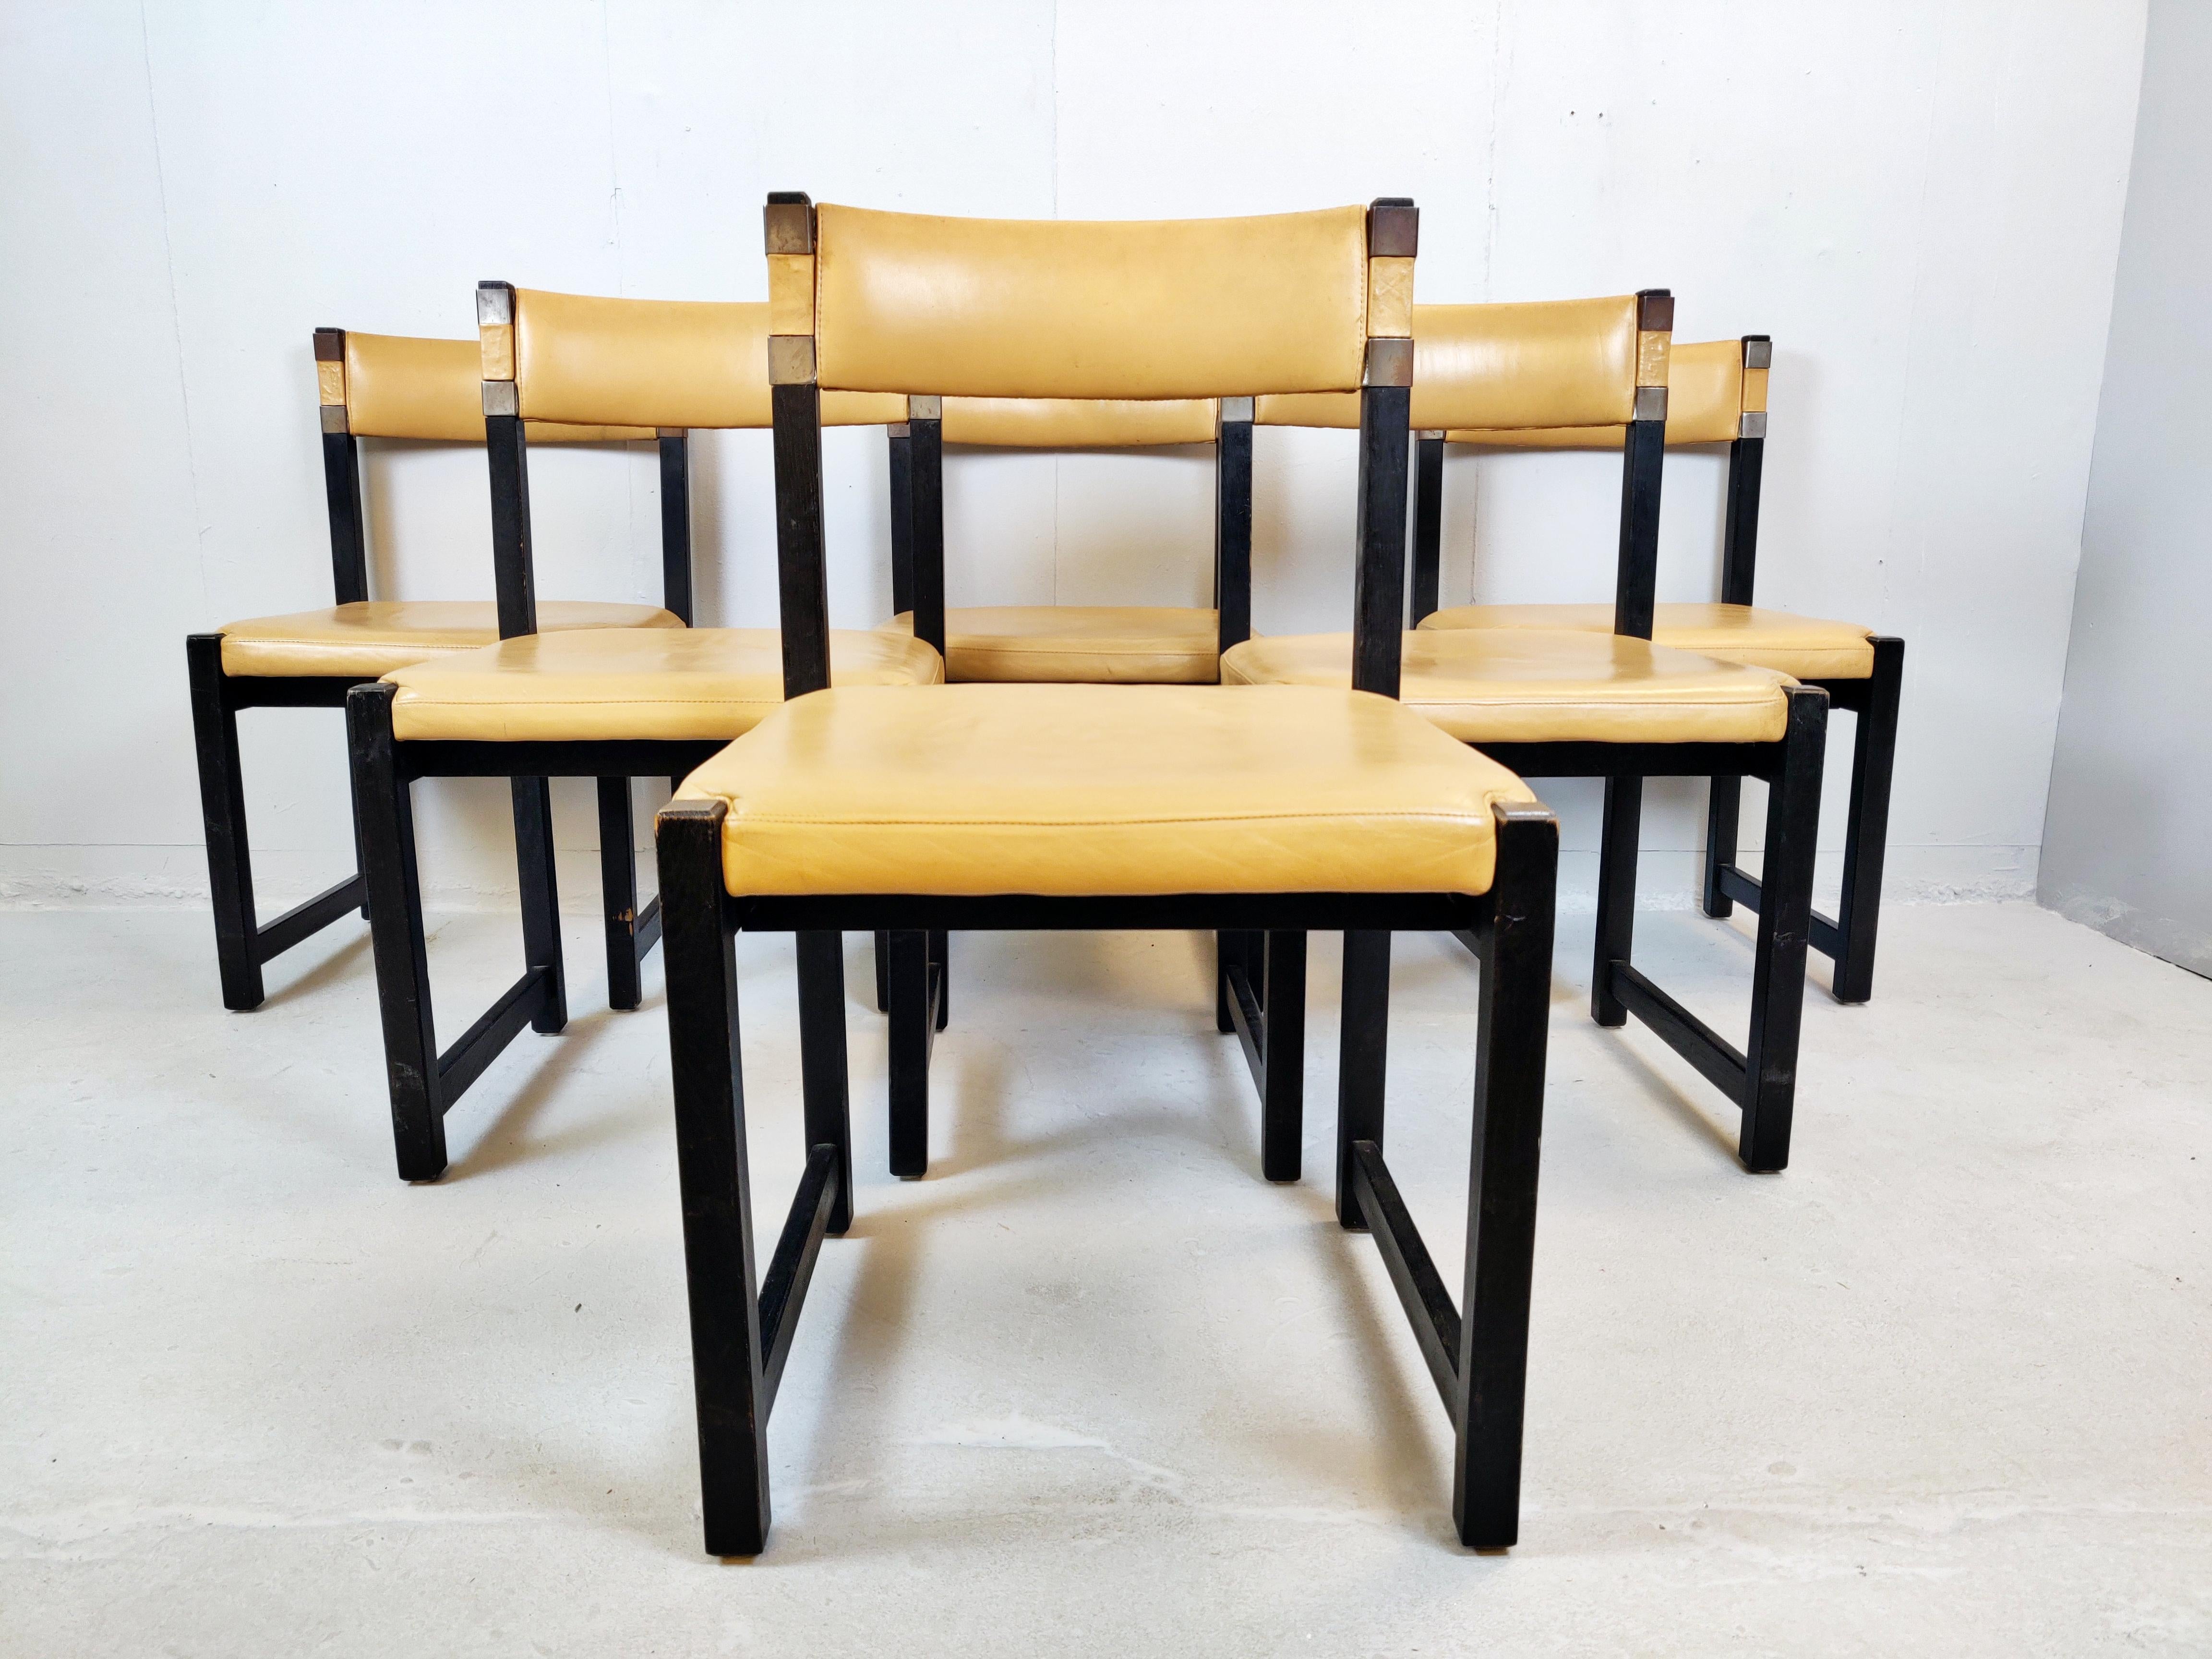 Set of six chairs, wood and leather, circa 1970.